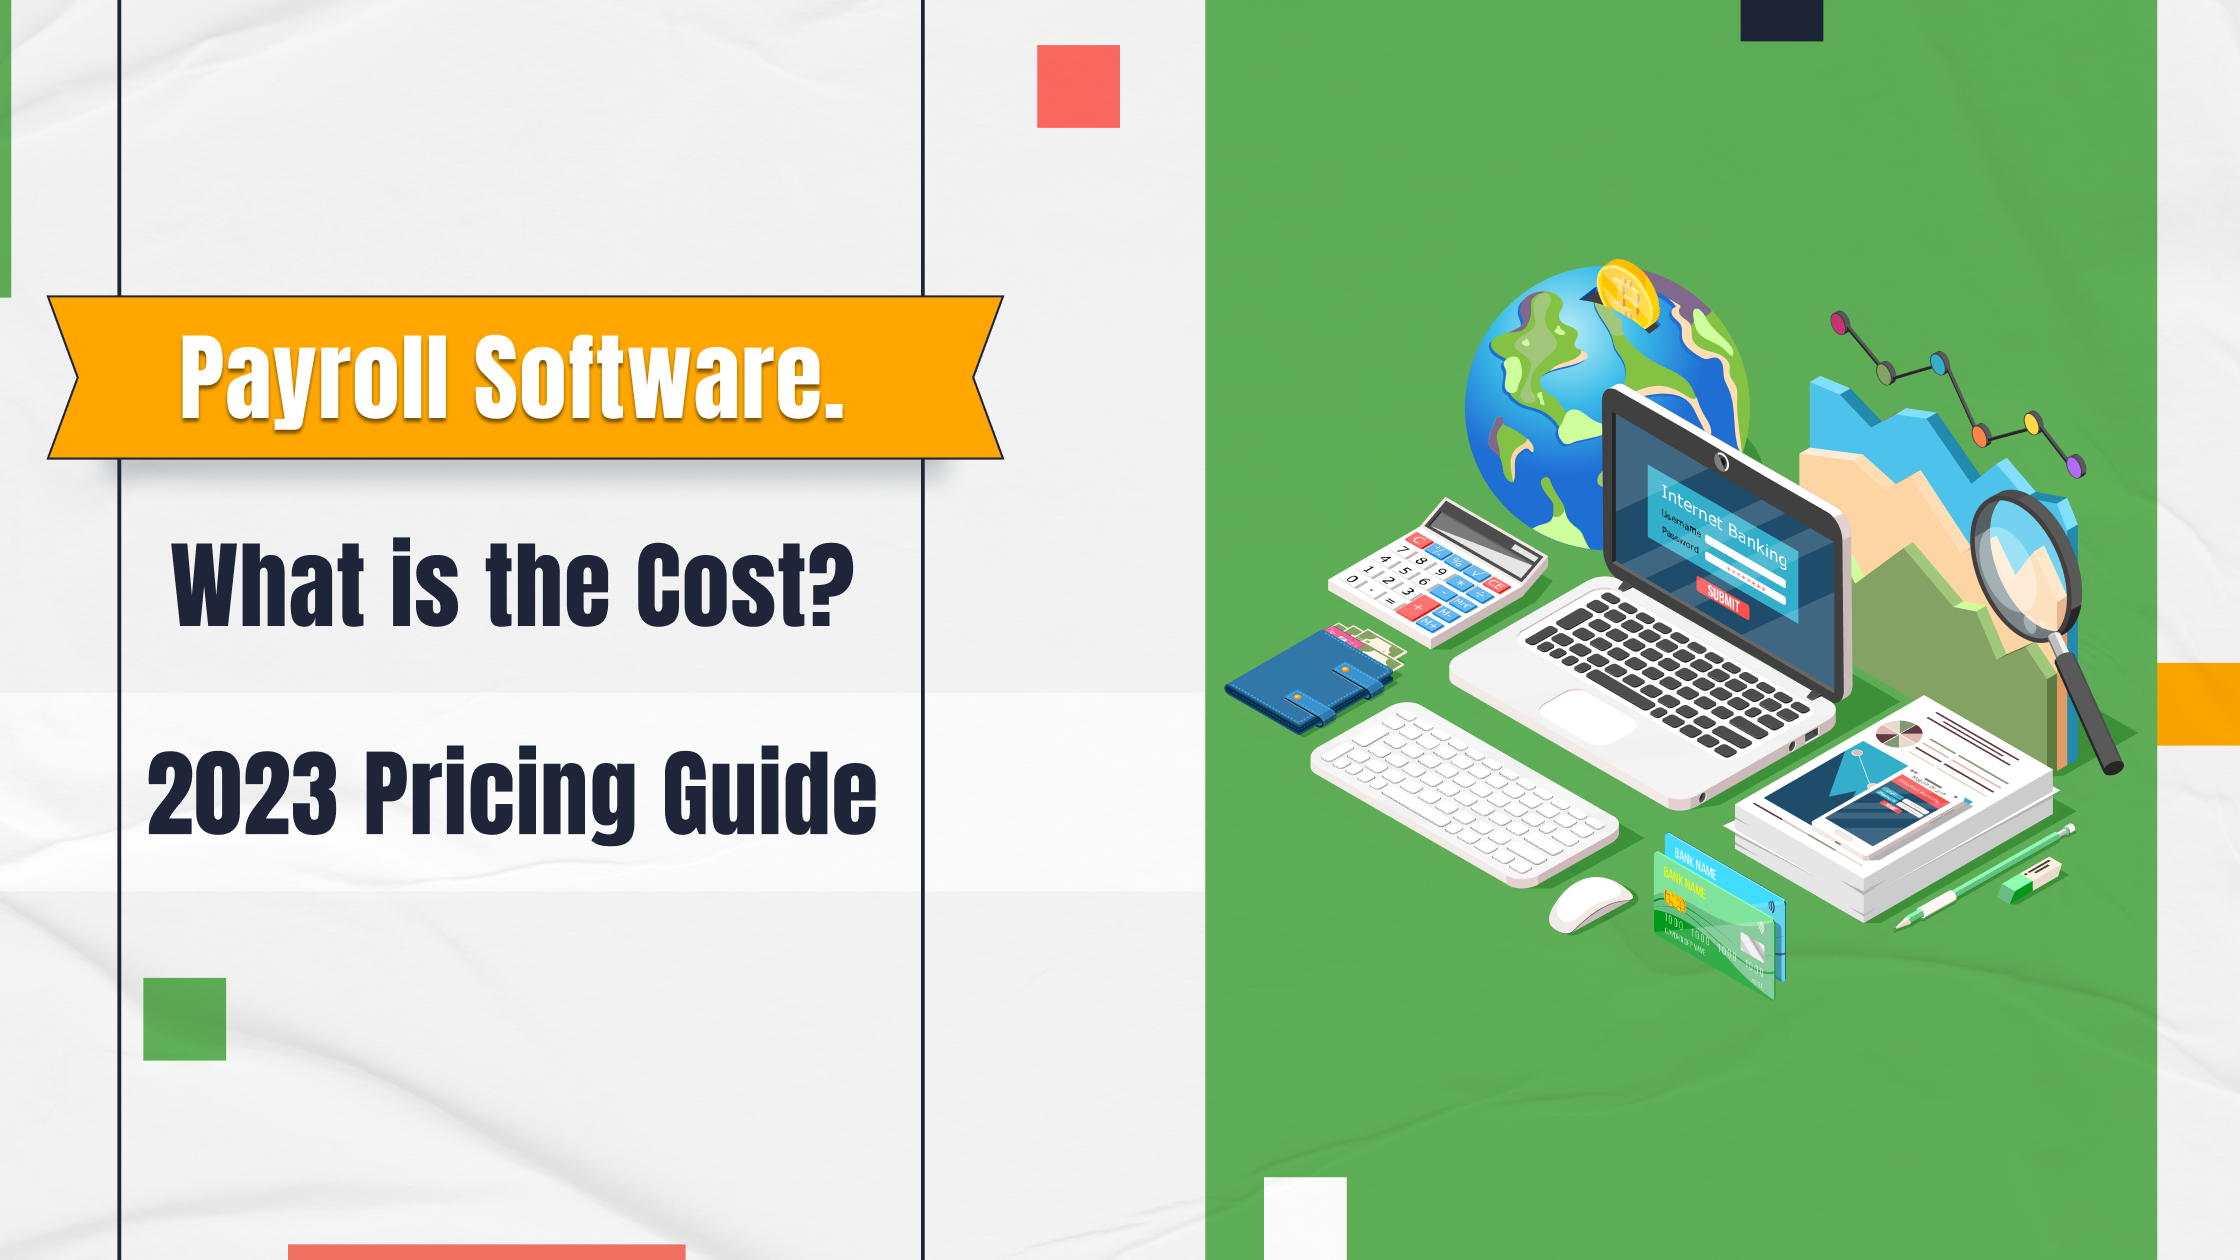 Payroll Software. What is the Cost 2023 Pricing Guide